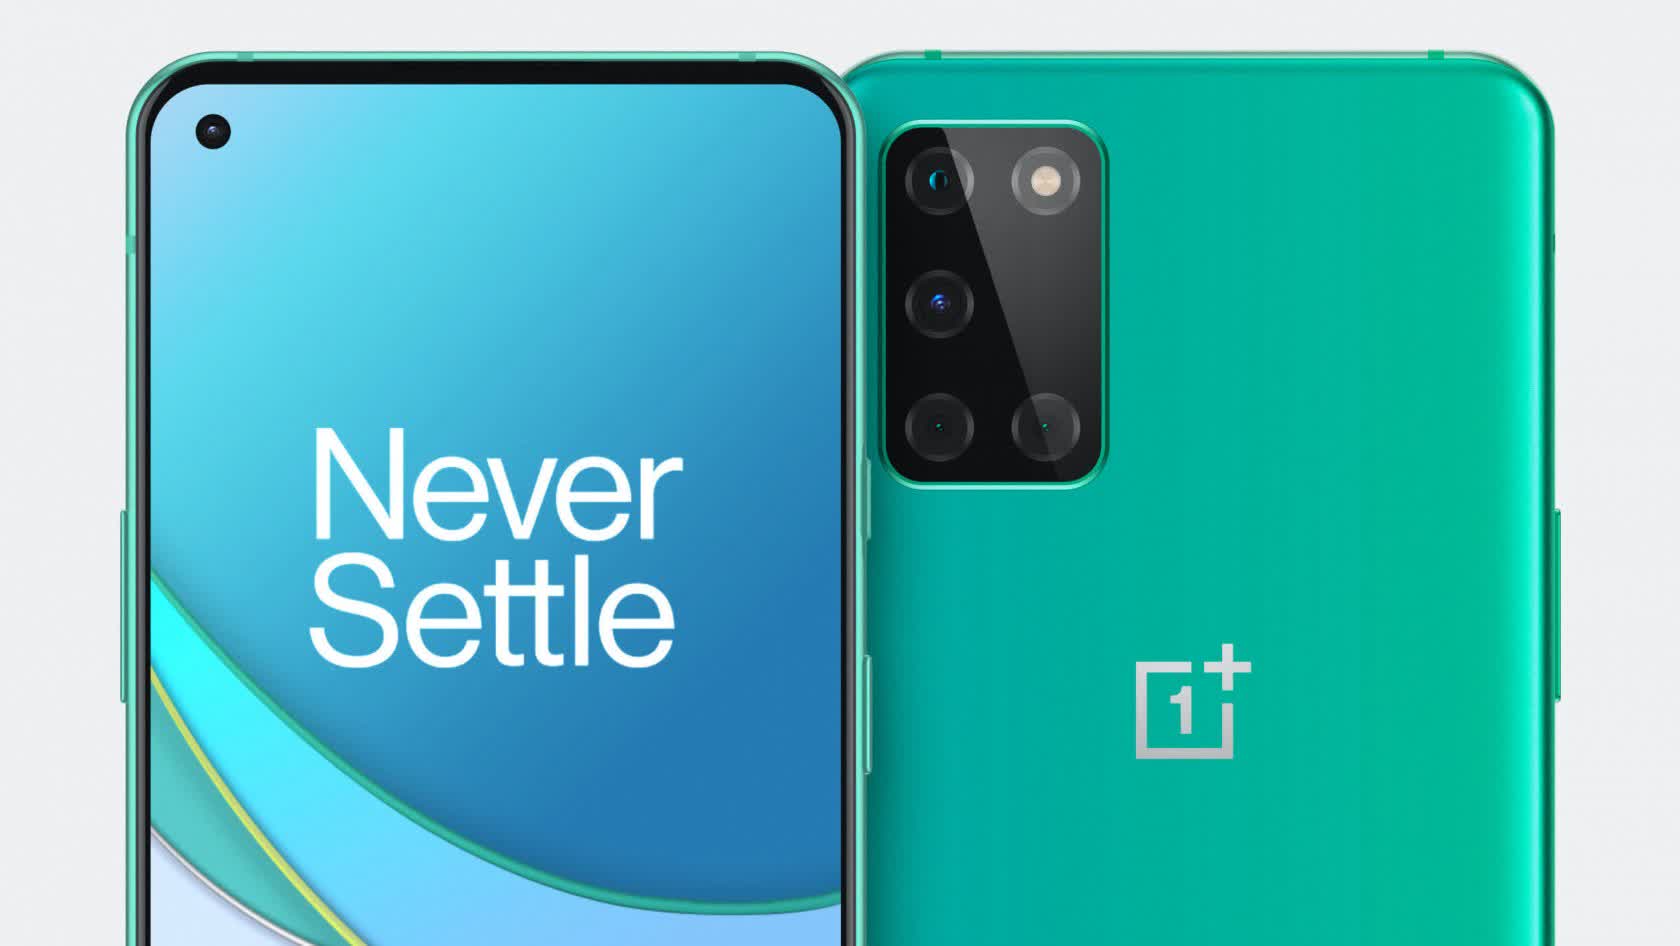 The OnePlus 8T features 120Hz always-on display and Warp Charge 65 for $750